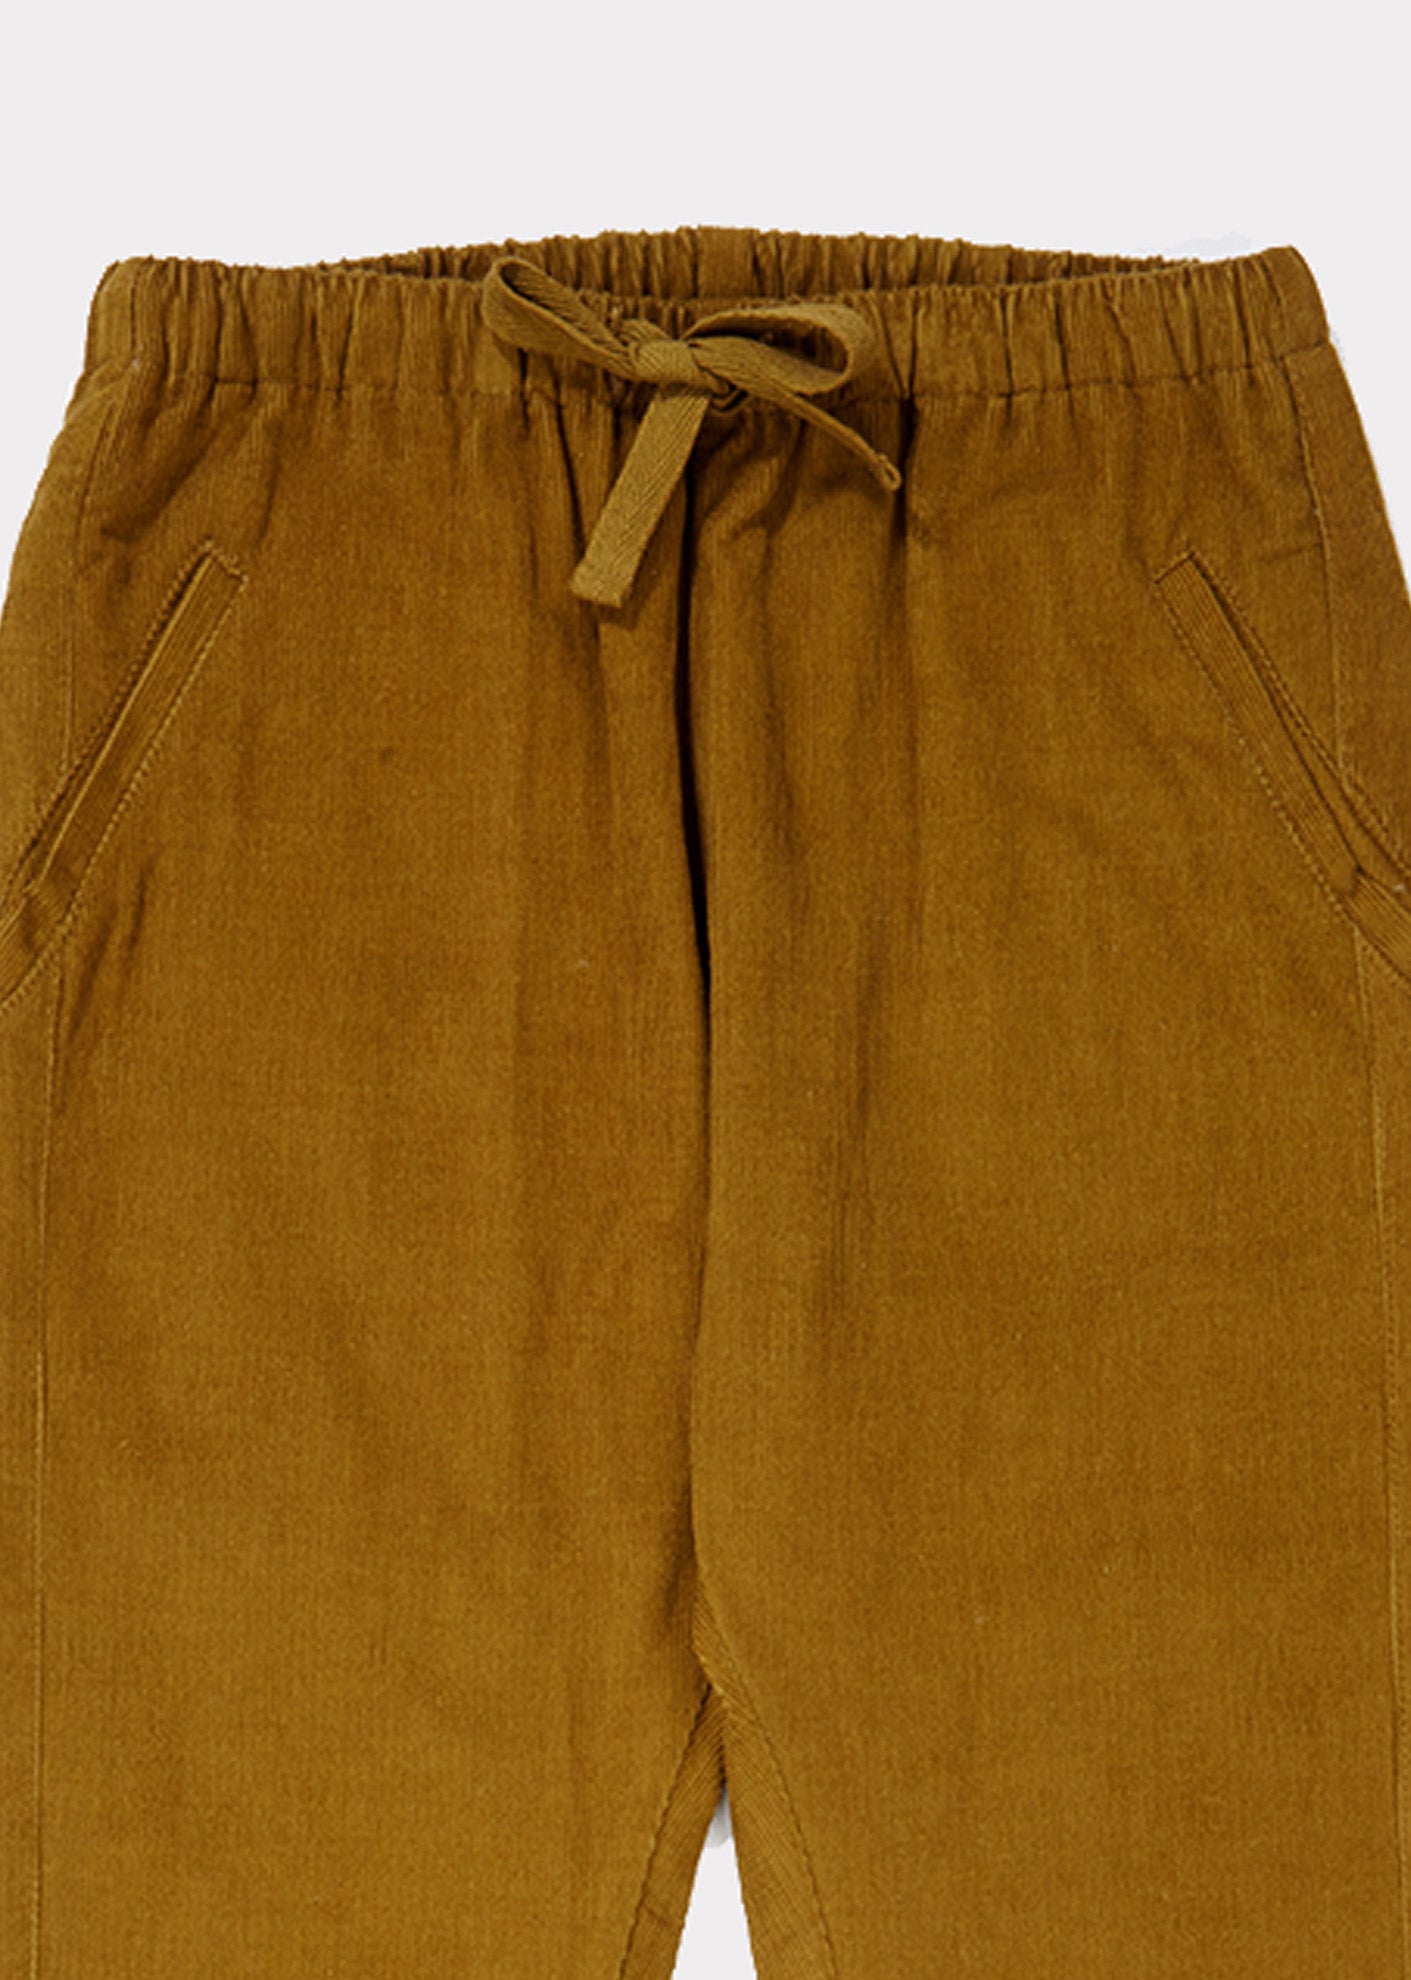 Girls Yellow Brown Cotton Trousers